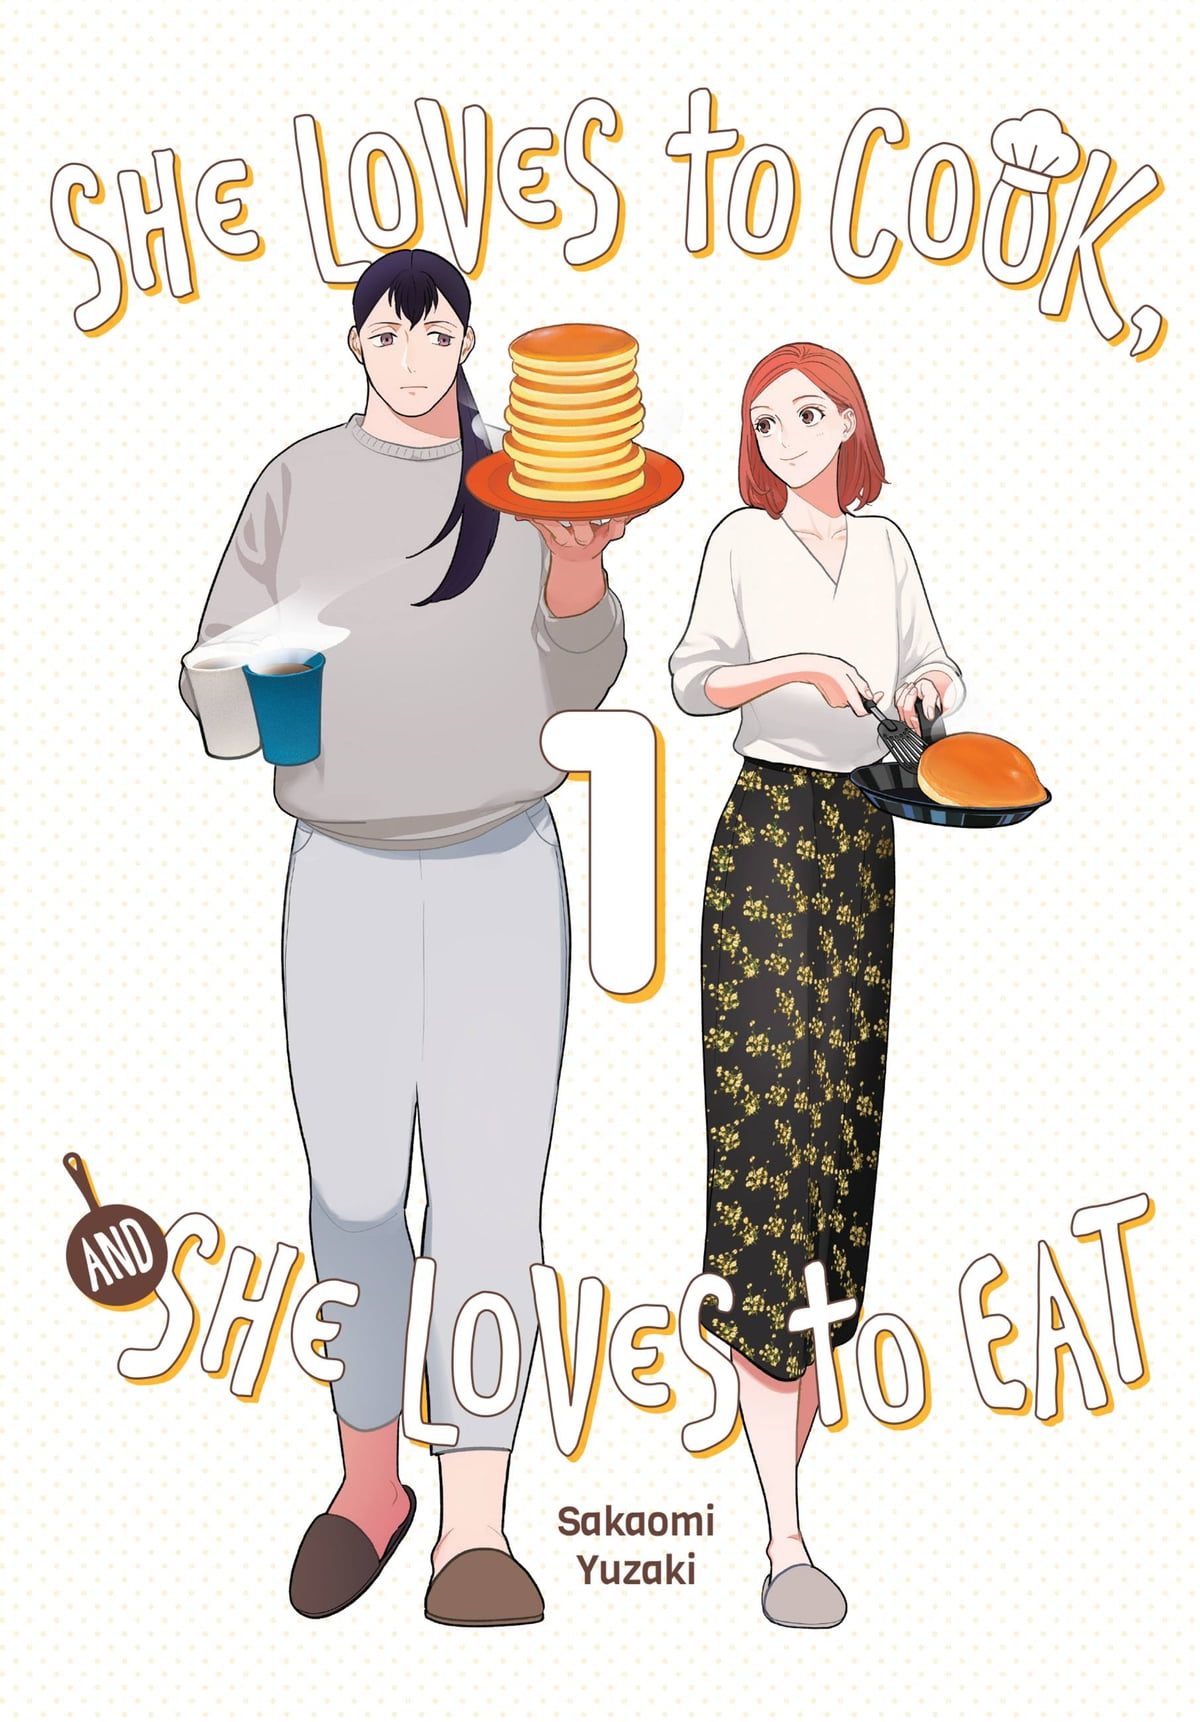 She Loves to Cook, and She Loves to Eat book cover